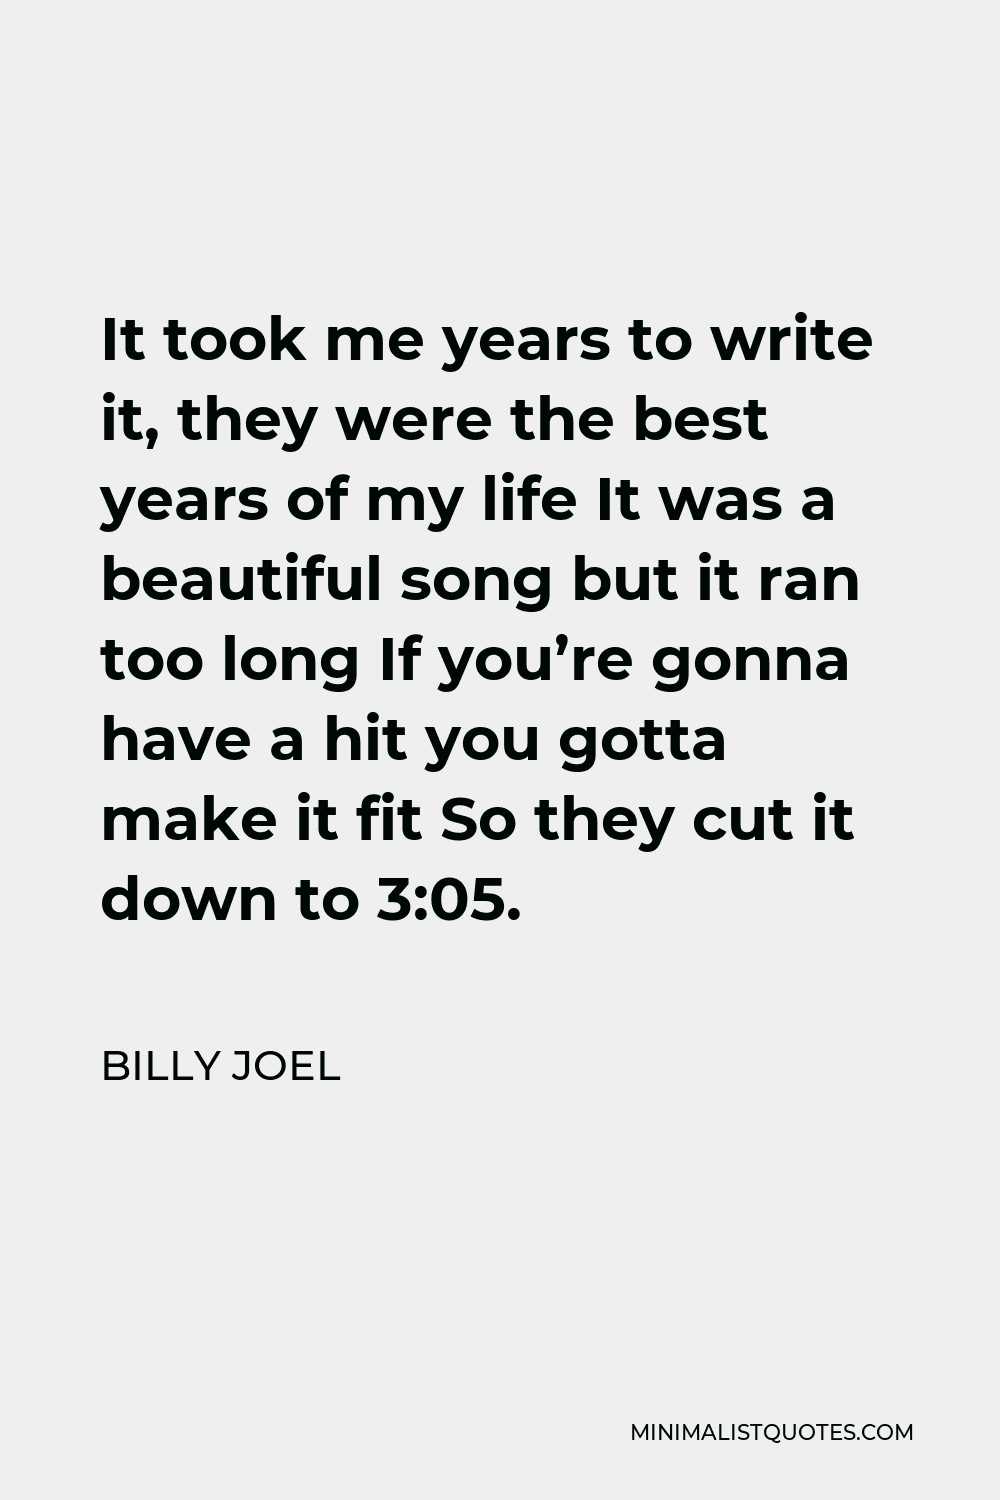 Billy Joel Quote - It took me years to write it, they were the best years of my life It was a beautiful song but it ran too long If you’re gonna have a hit you gotta make it fit So they cut it down to 3:05.